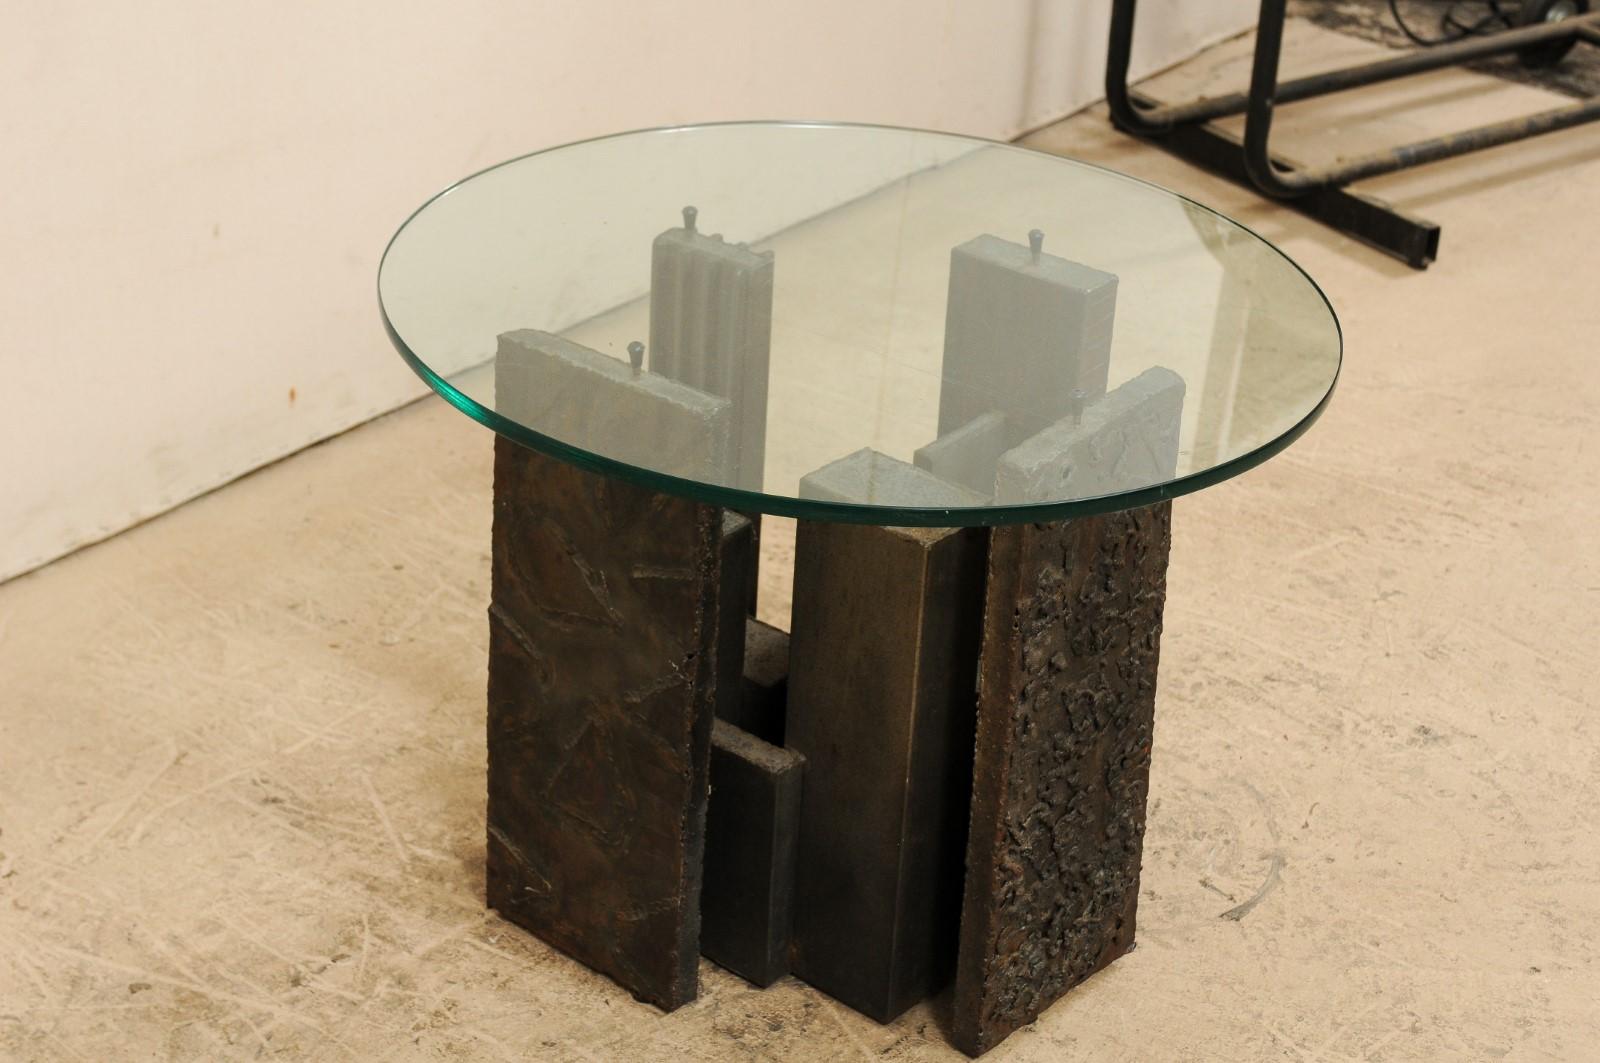 A Brutalist style sculpted side table, designed by artists Paul Evans (American, 1931-1987) for Directional furniture, circa 1970s. This vintage side table has a piece of round-shaped glass which rests atop Paul Evans creation of sculpted metal